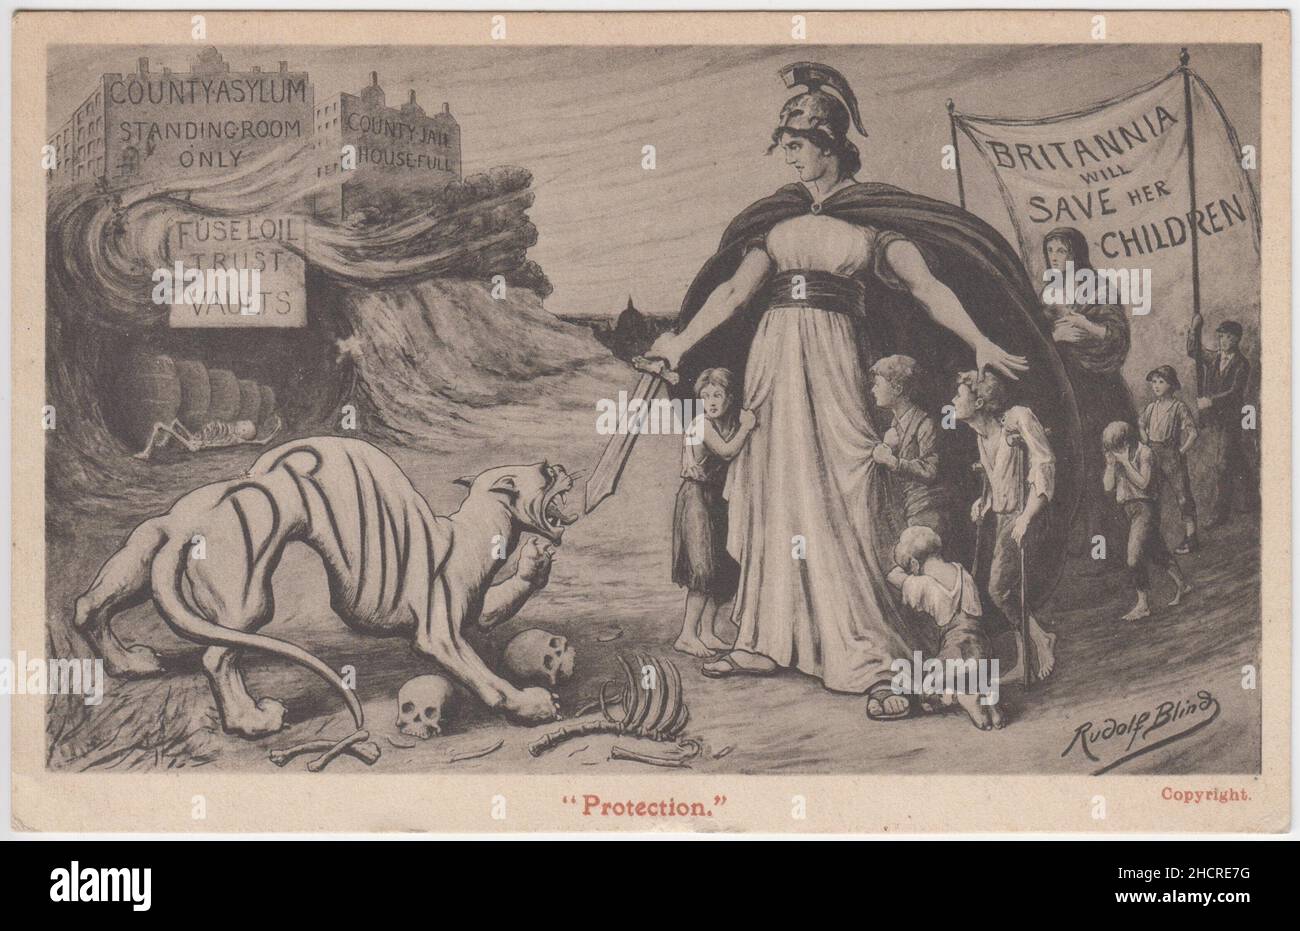 'Protection': pro-temperance postcard showing Britannia fending off the beast 'drink' with a sword. A mother and children in ragged clothing are behind her, several of them carrying a banner with the slogan 'Britannia will save her children', and one child on crutches. A packed county asylum, county jail / prison and the fusel oil (alcohol) trust vaults can be seen in the background. The image was produced by the painter Rudolf Blind (1850-1916) Stock Photo